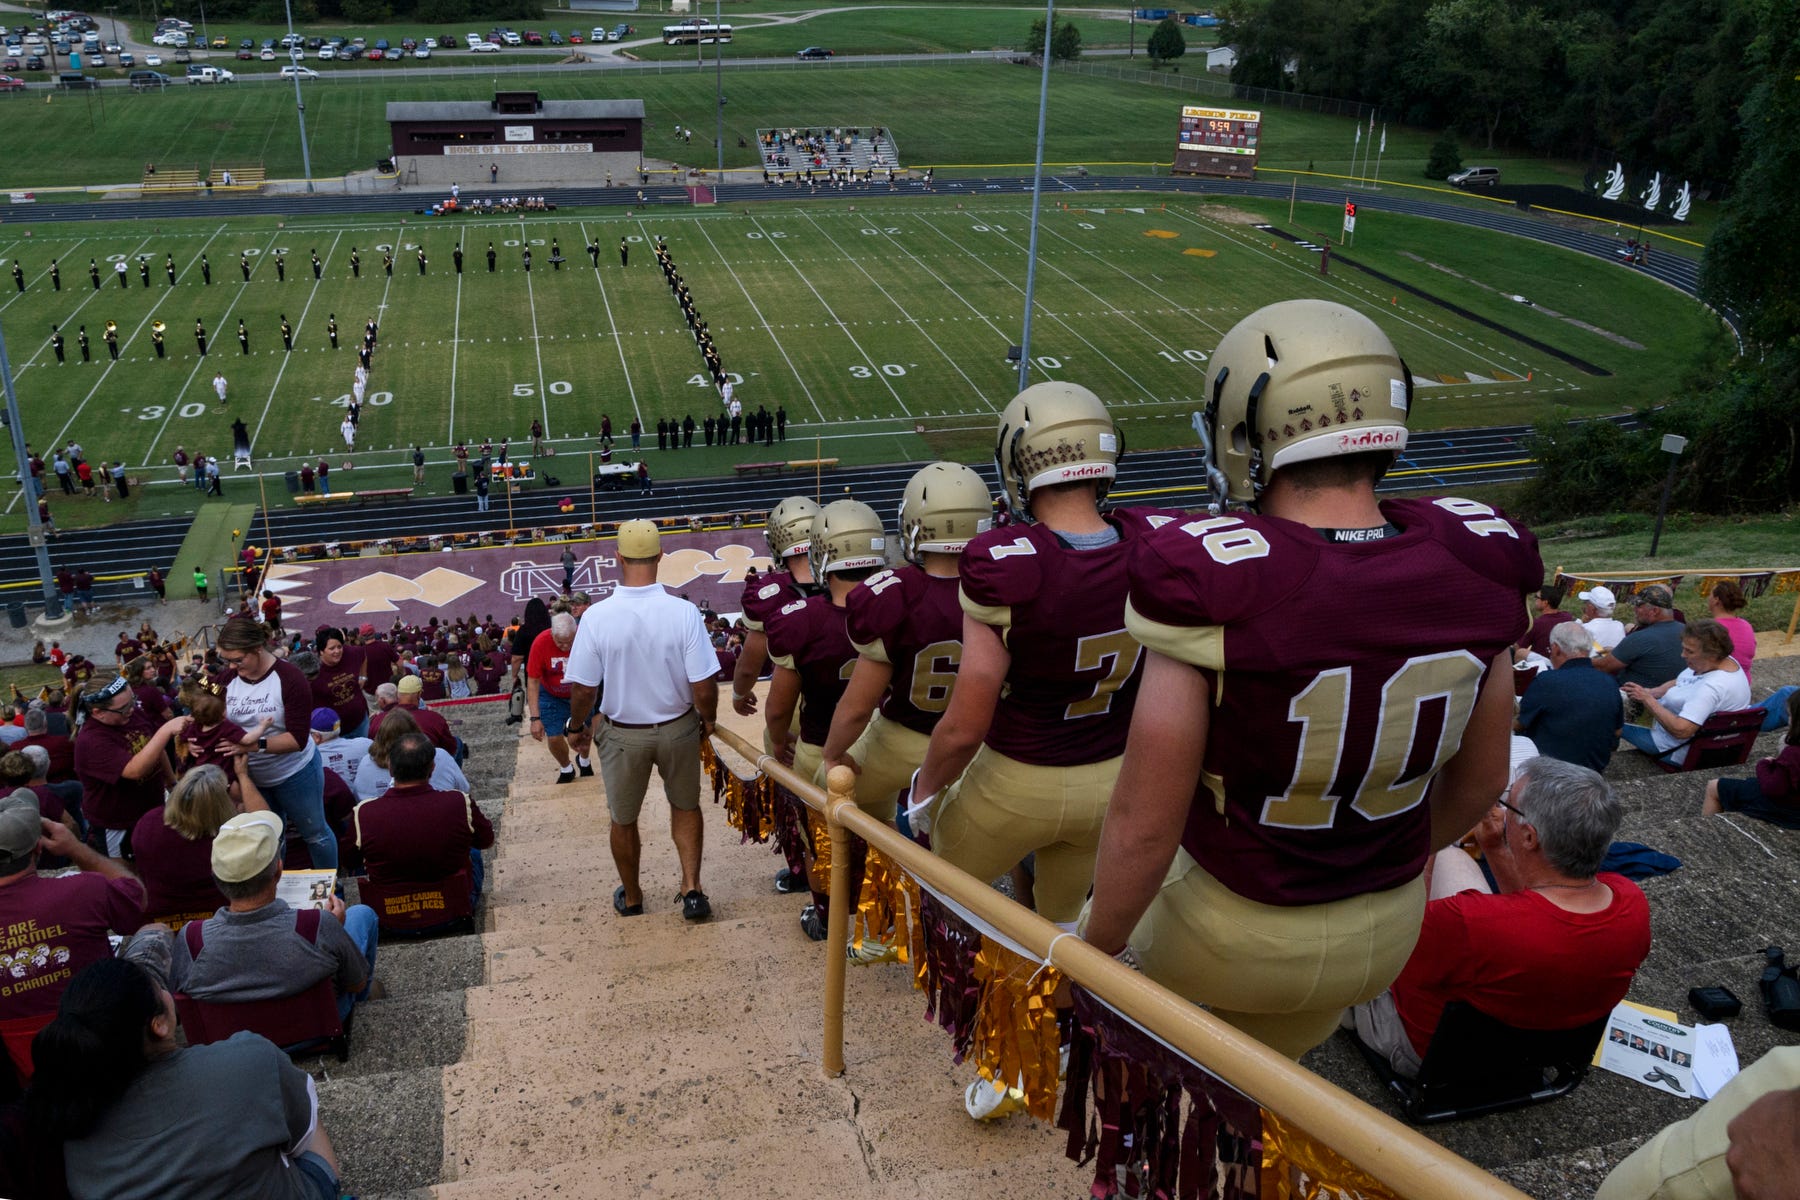 Mount Carmel boasts storied tradition, but changes coming